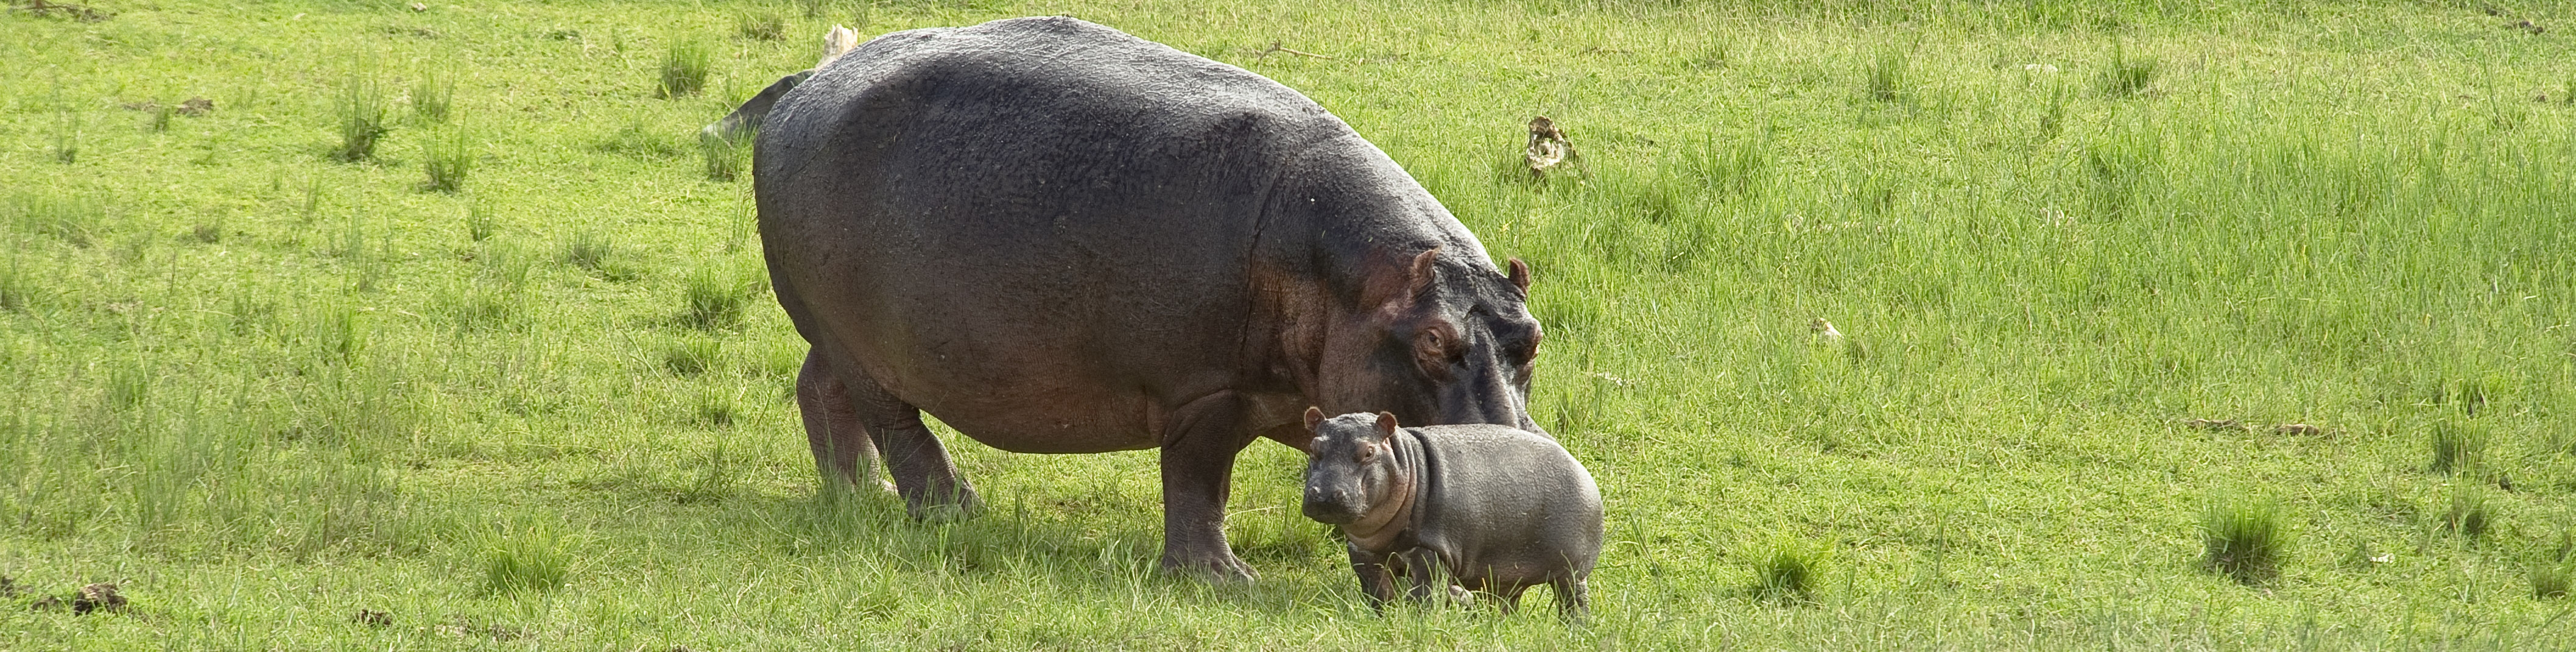 Mama hippo and baby, Queen Elizabeth National Park